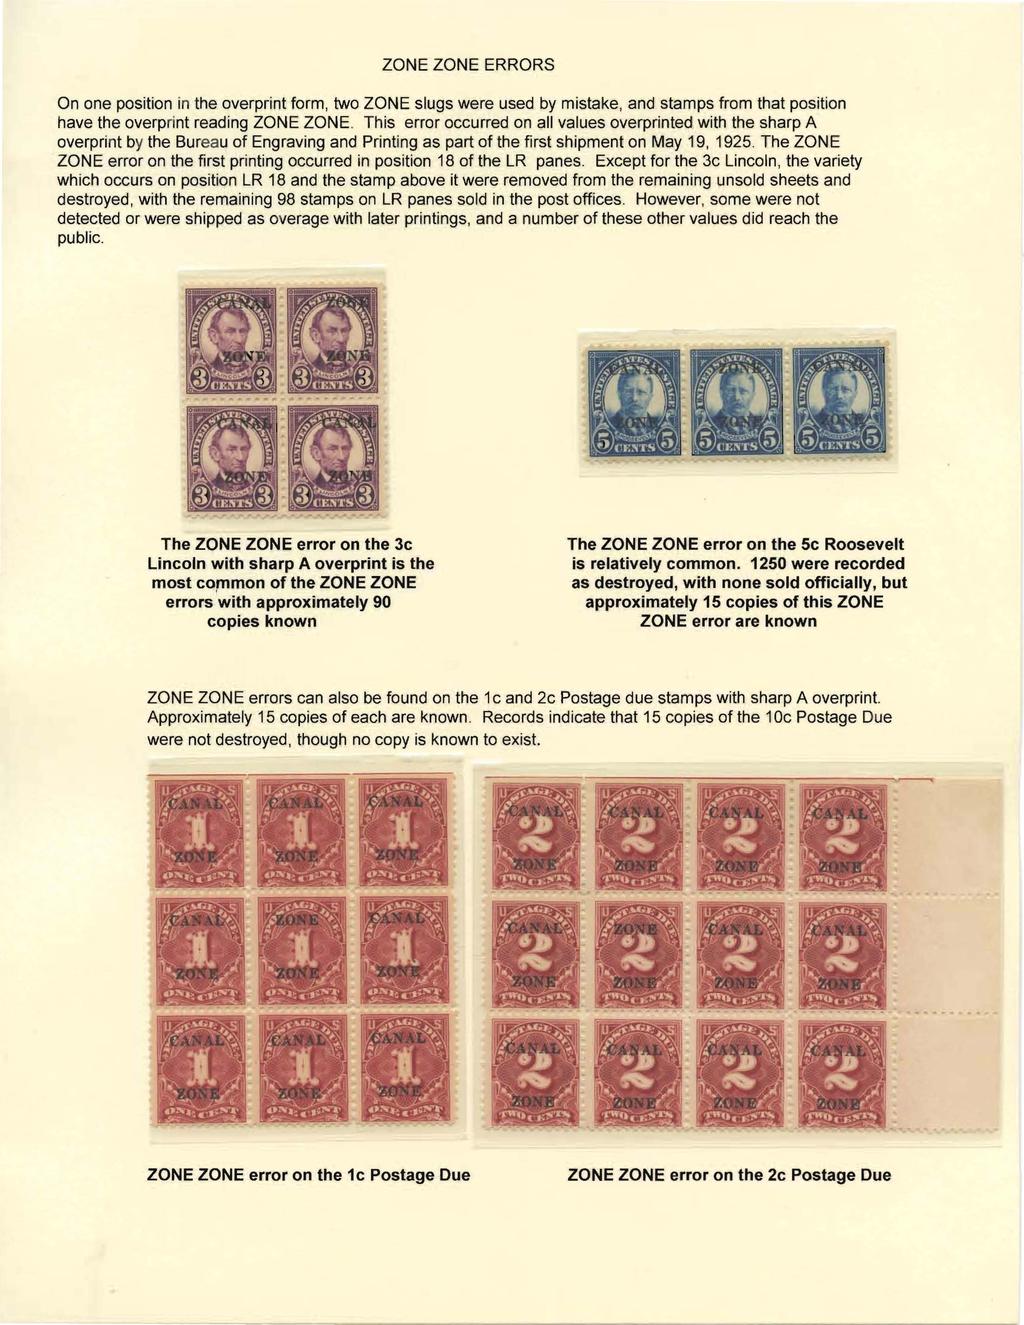 ZONE ZONE ERRORS On one position in the overprint form, two ZONE slugs were used by mistake, and stamps from that position have the overprint reading ZONE ZONE.